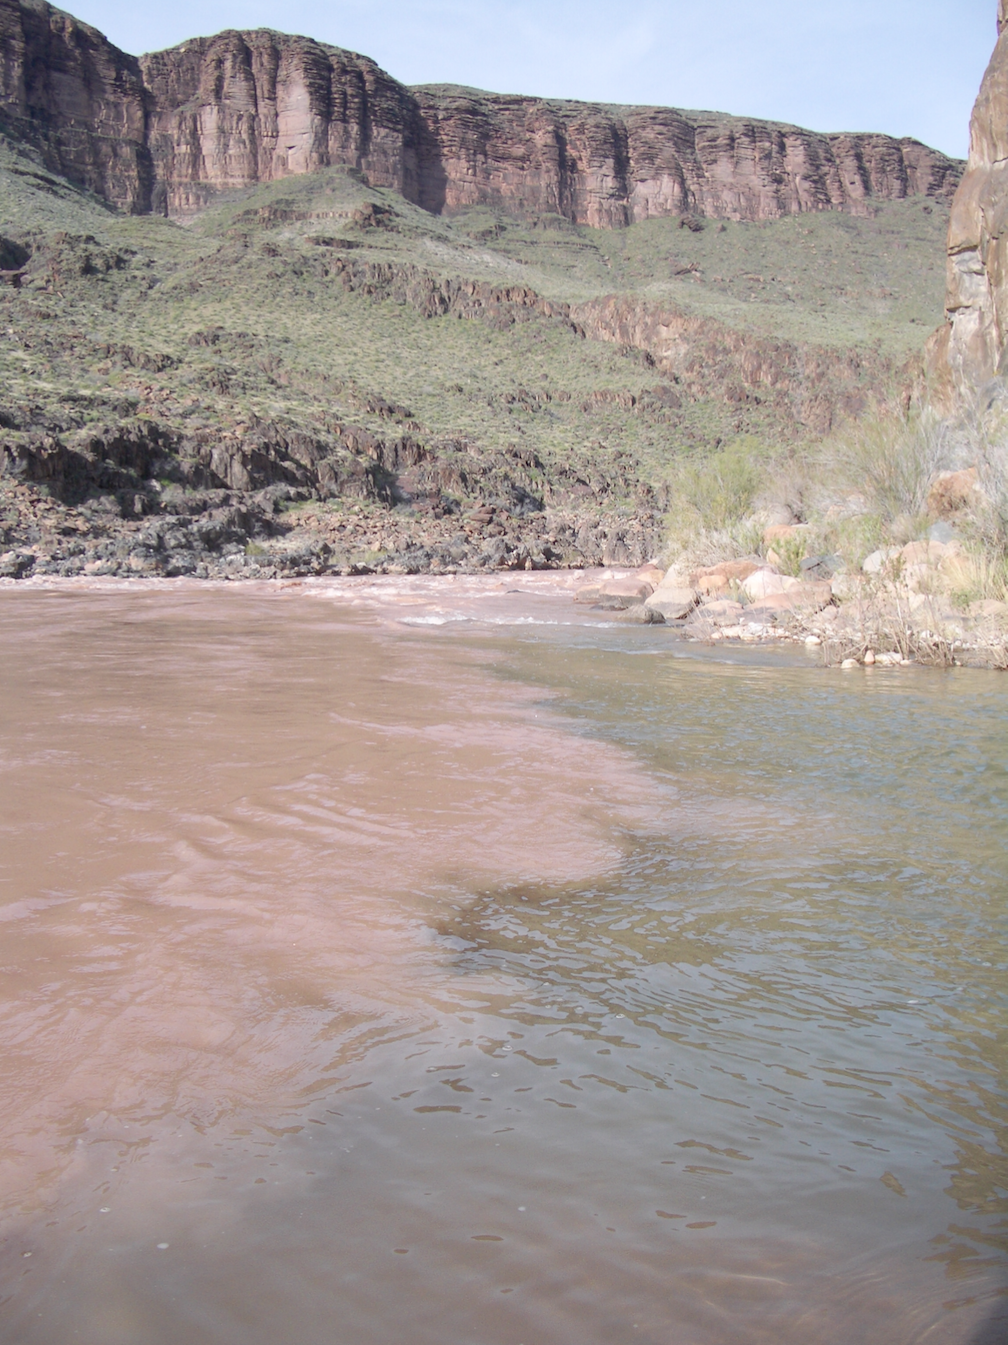 Figure 1. Mixing of the clear water of Shinumo Creek with the sediment-laden Colorado River at RM 109.